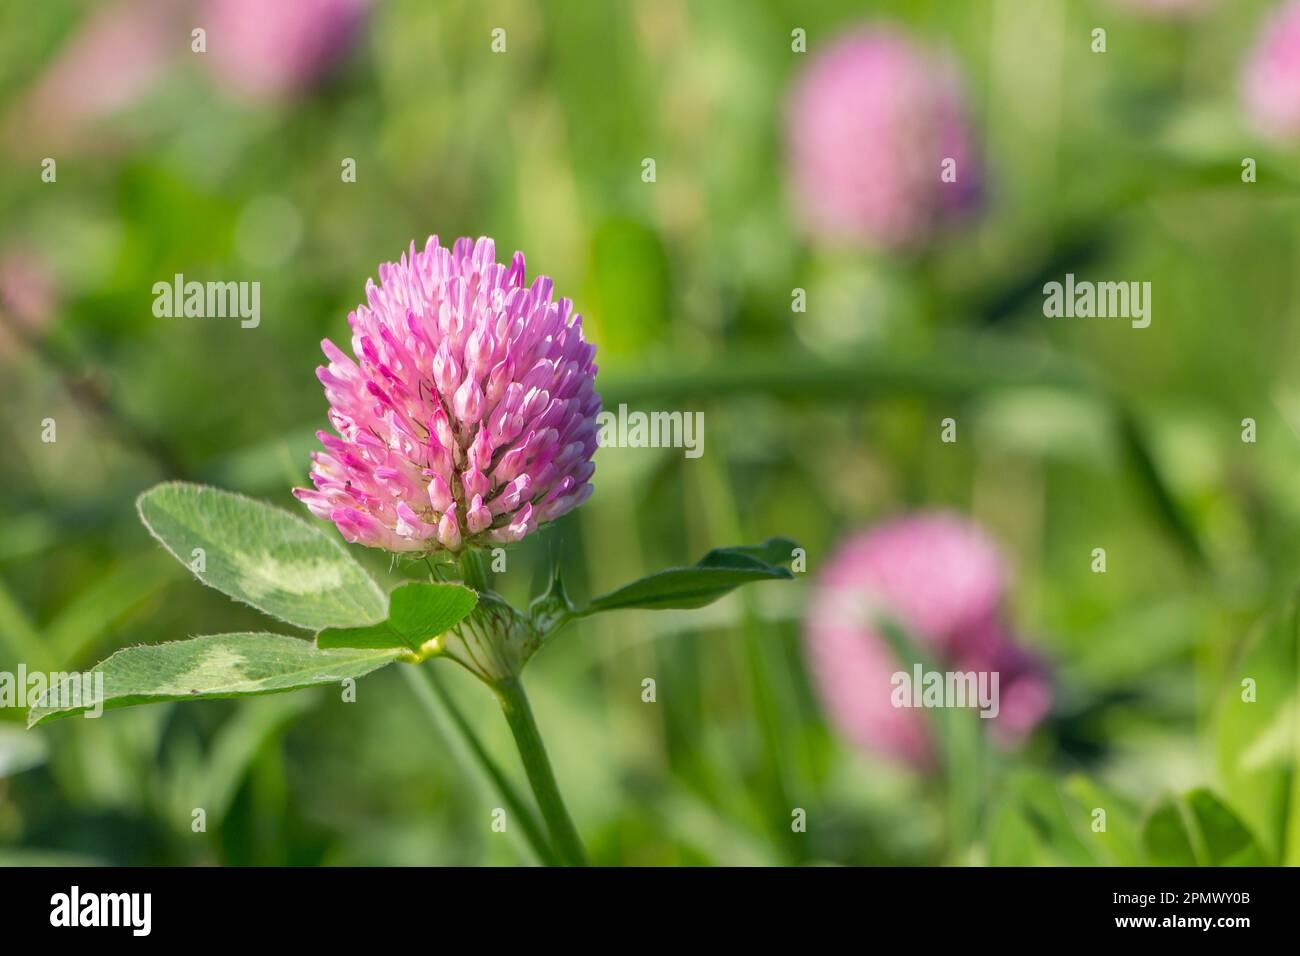 Lilac clover flower close-up in the field outdoor Stock Photo